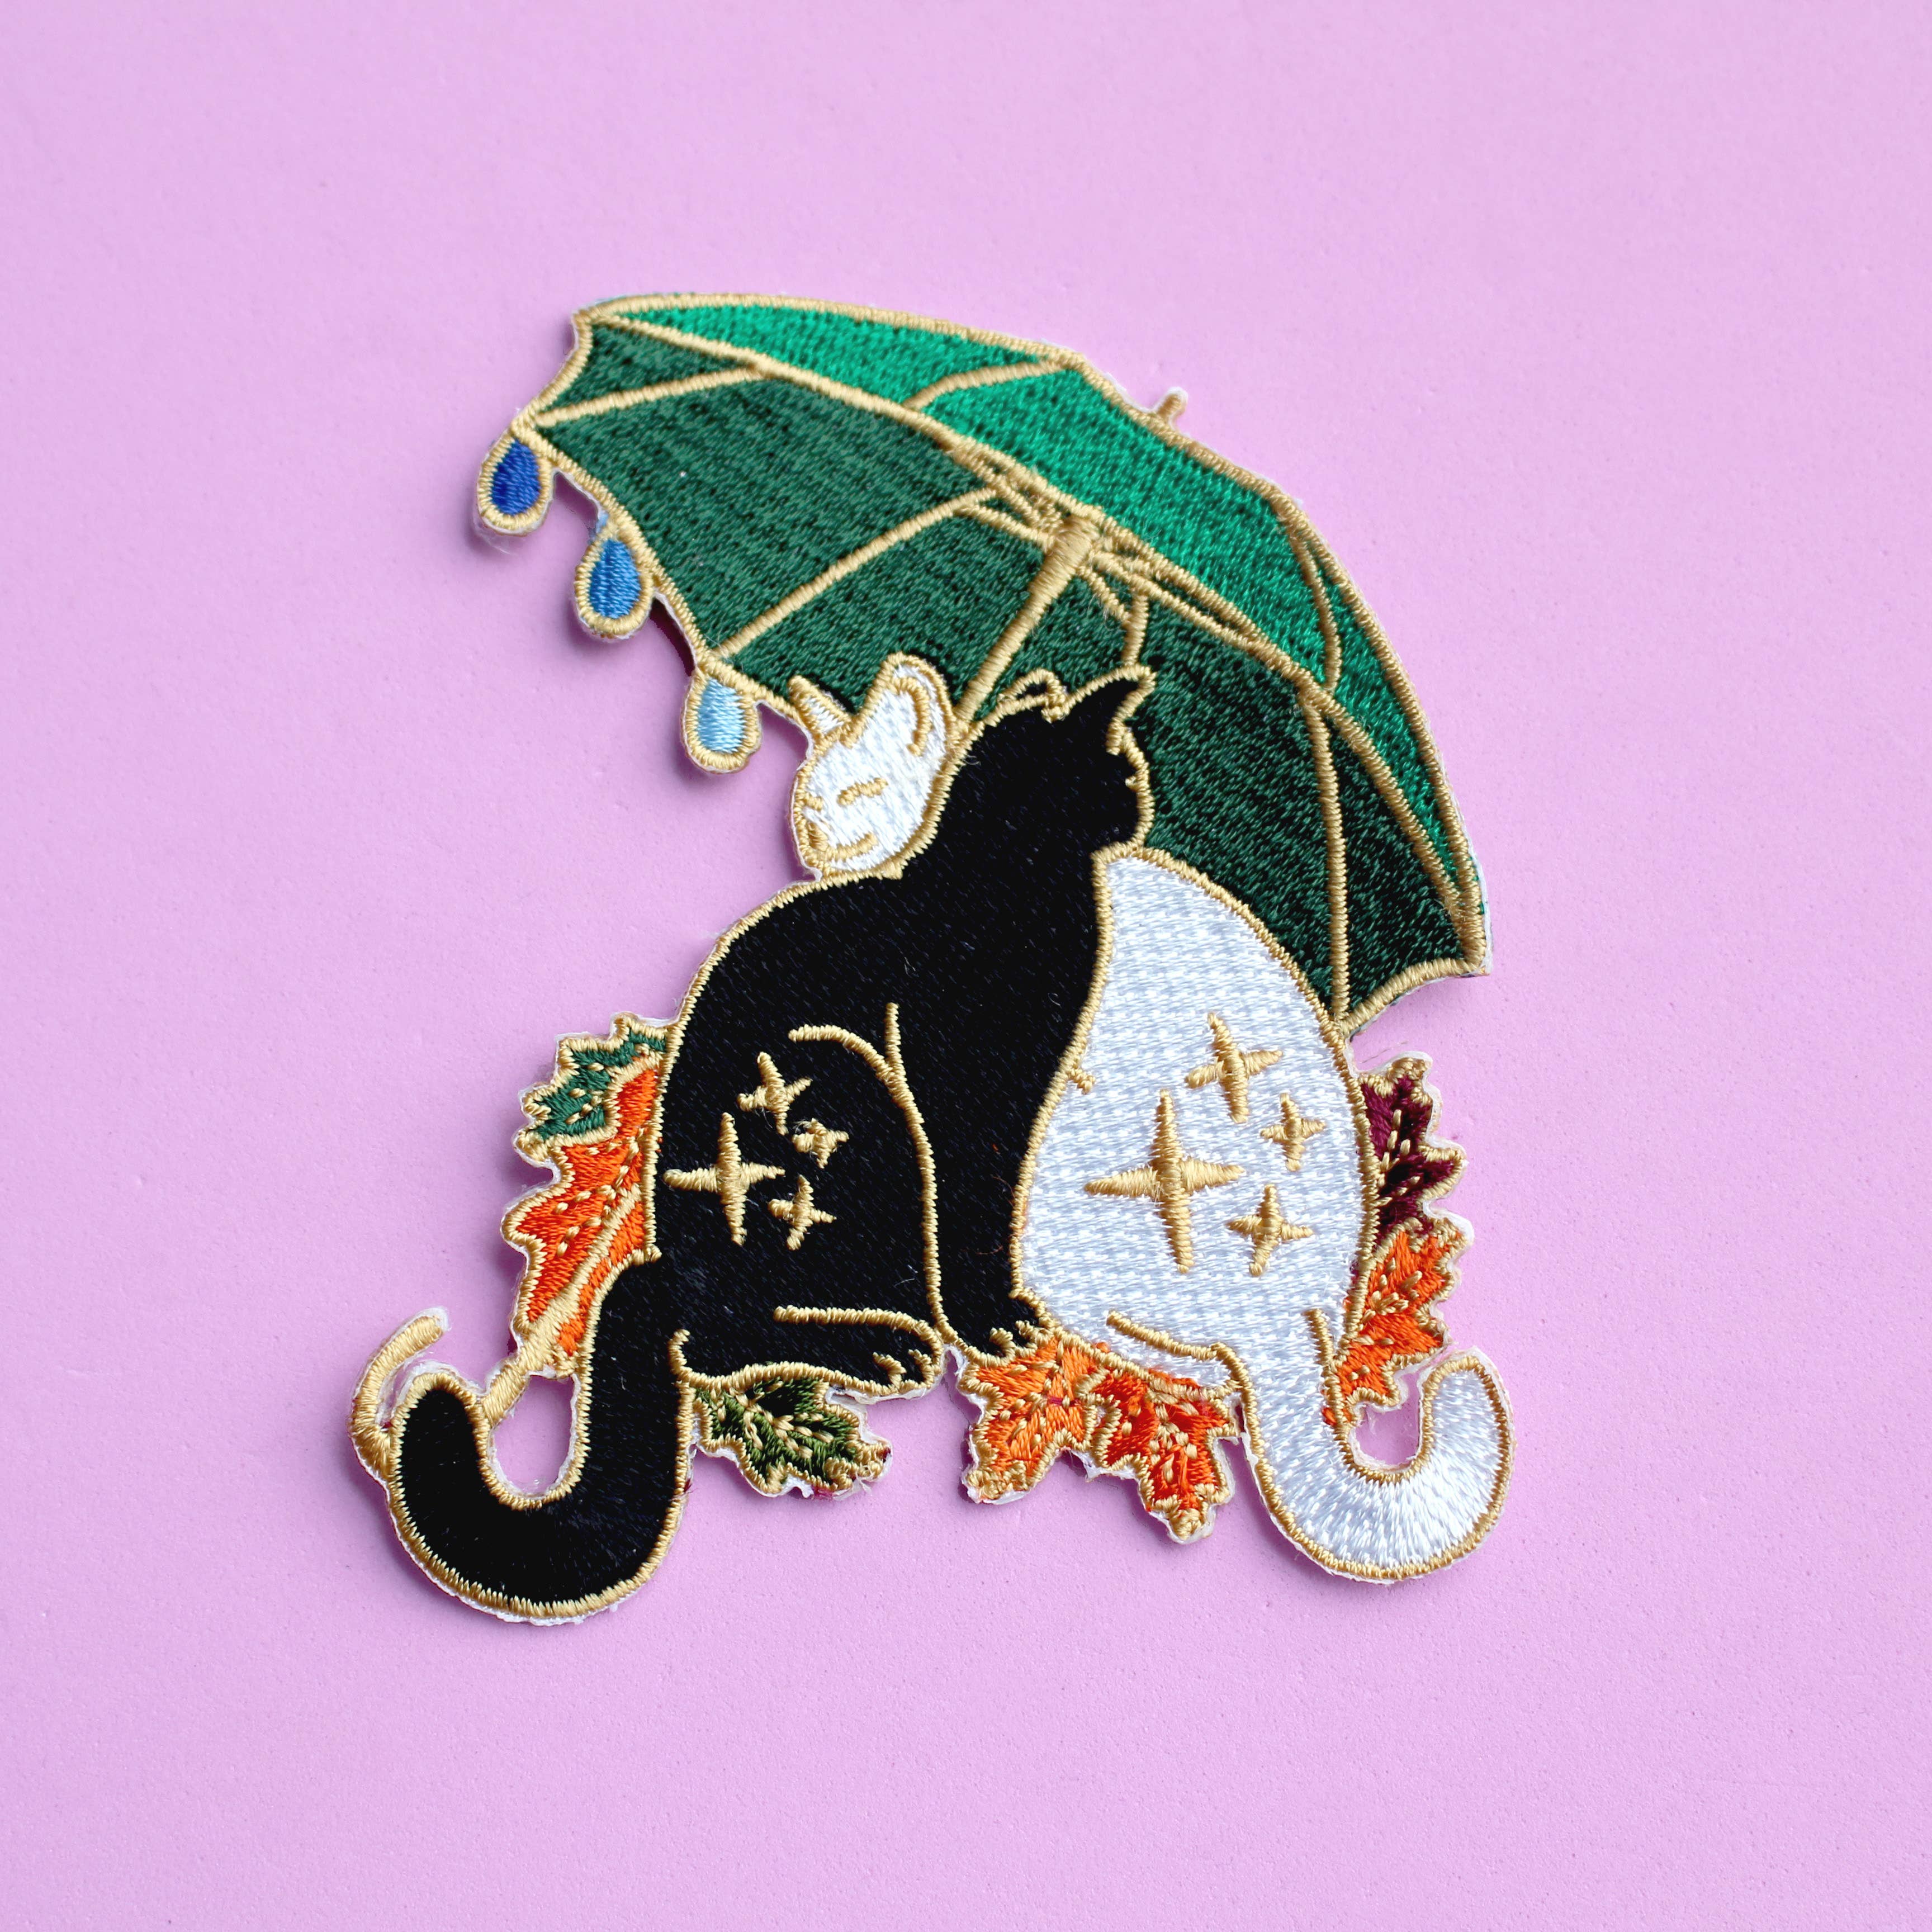 Umbrella Cats Embroidered Patch from Glitter Punk